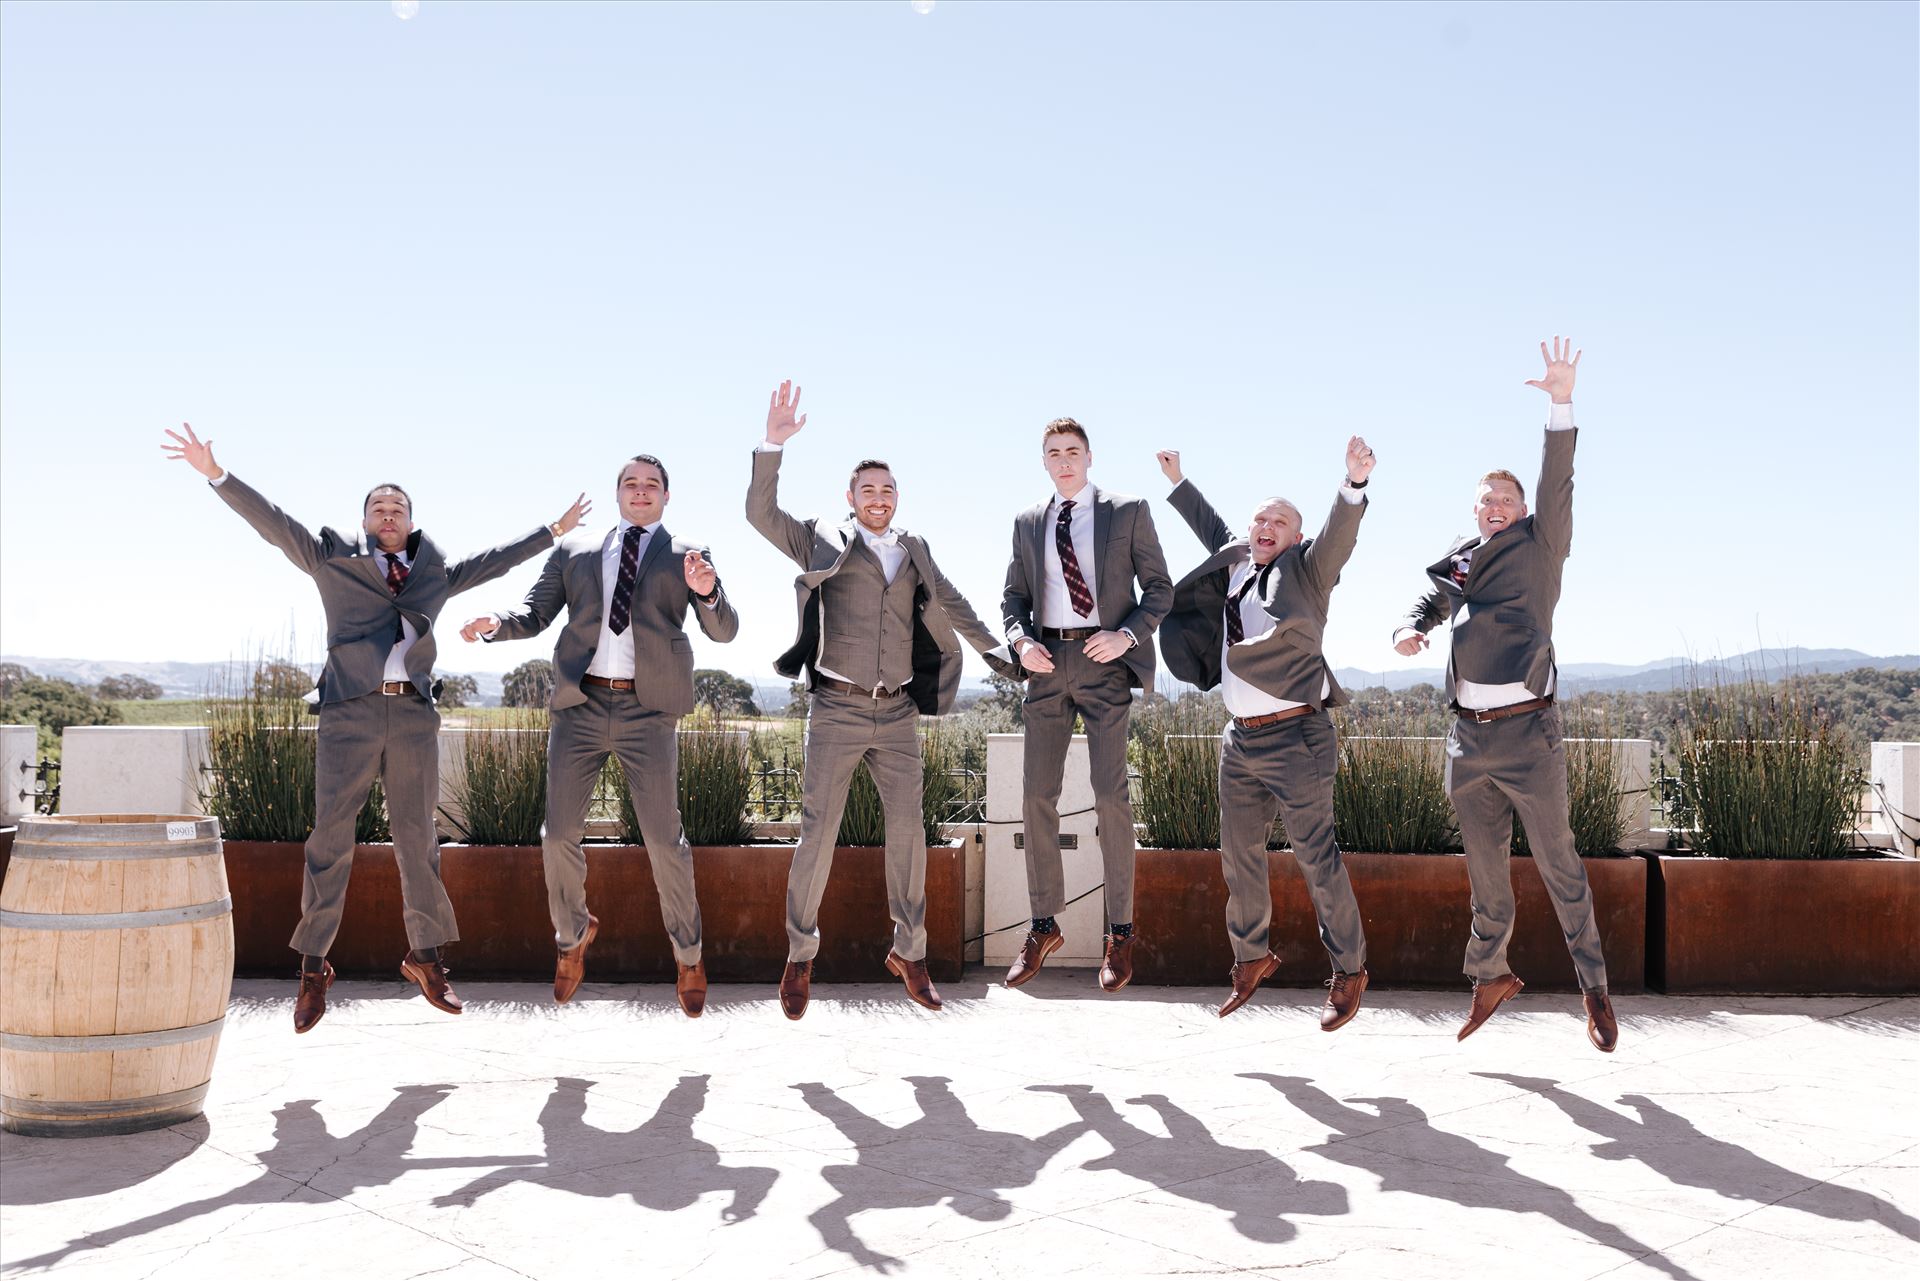 Edith and Kyle 004 - Mirror's Edge Photography captures Edith and Kyle's wedding at the Tooth and Nail Winery in Paso Robles California. Groom and Groomsmen do the jump. by Sarah Williams